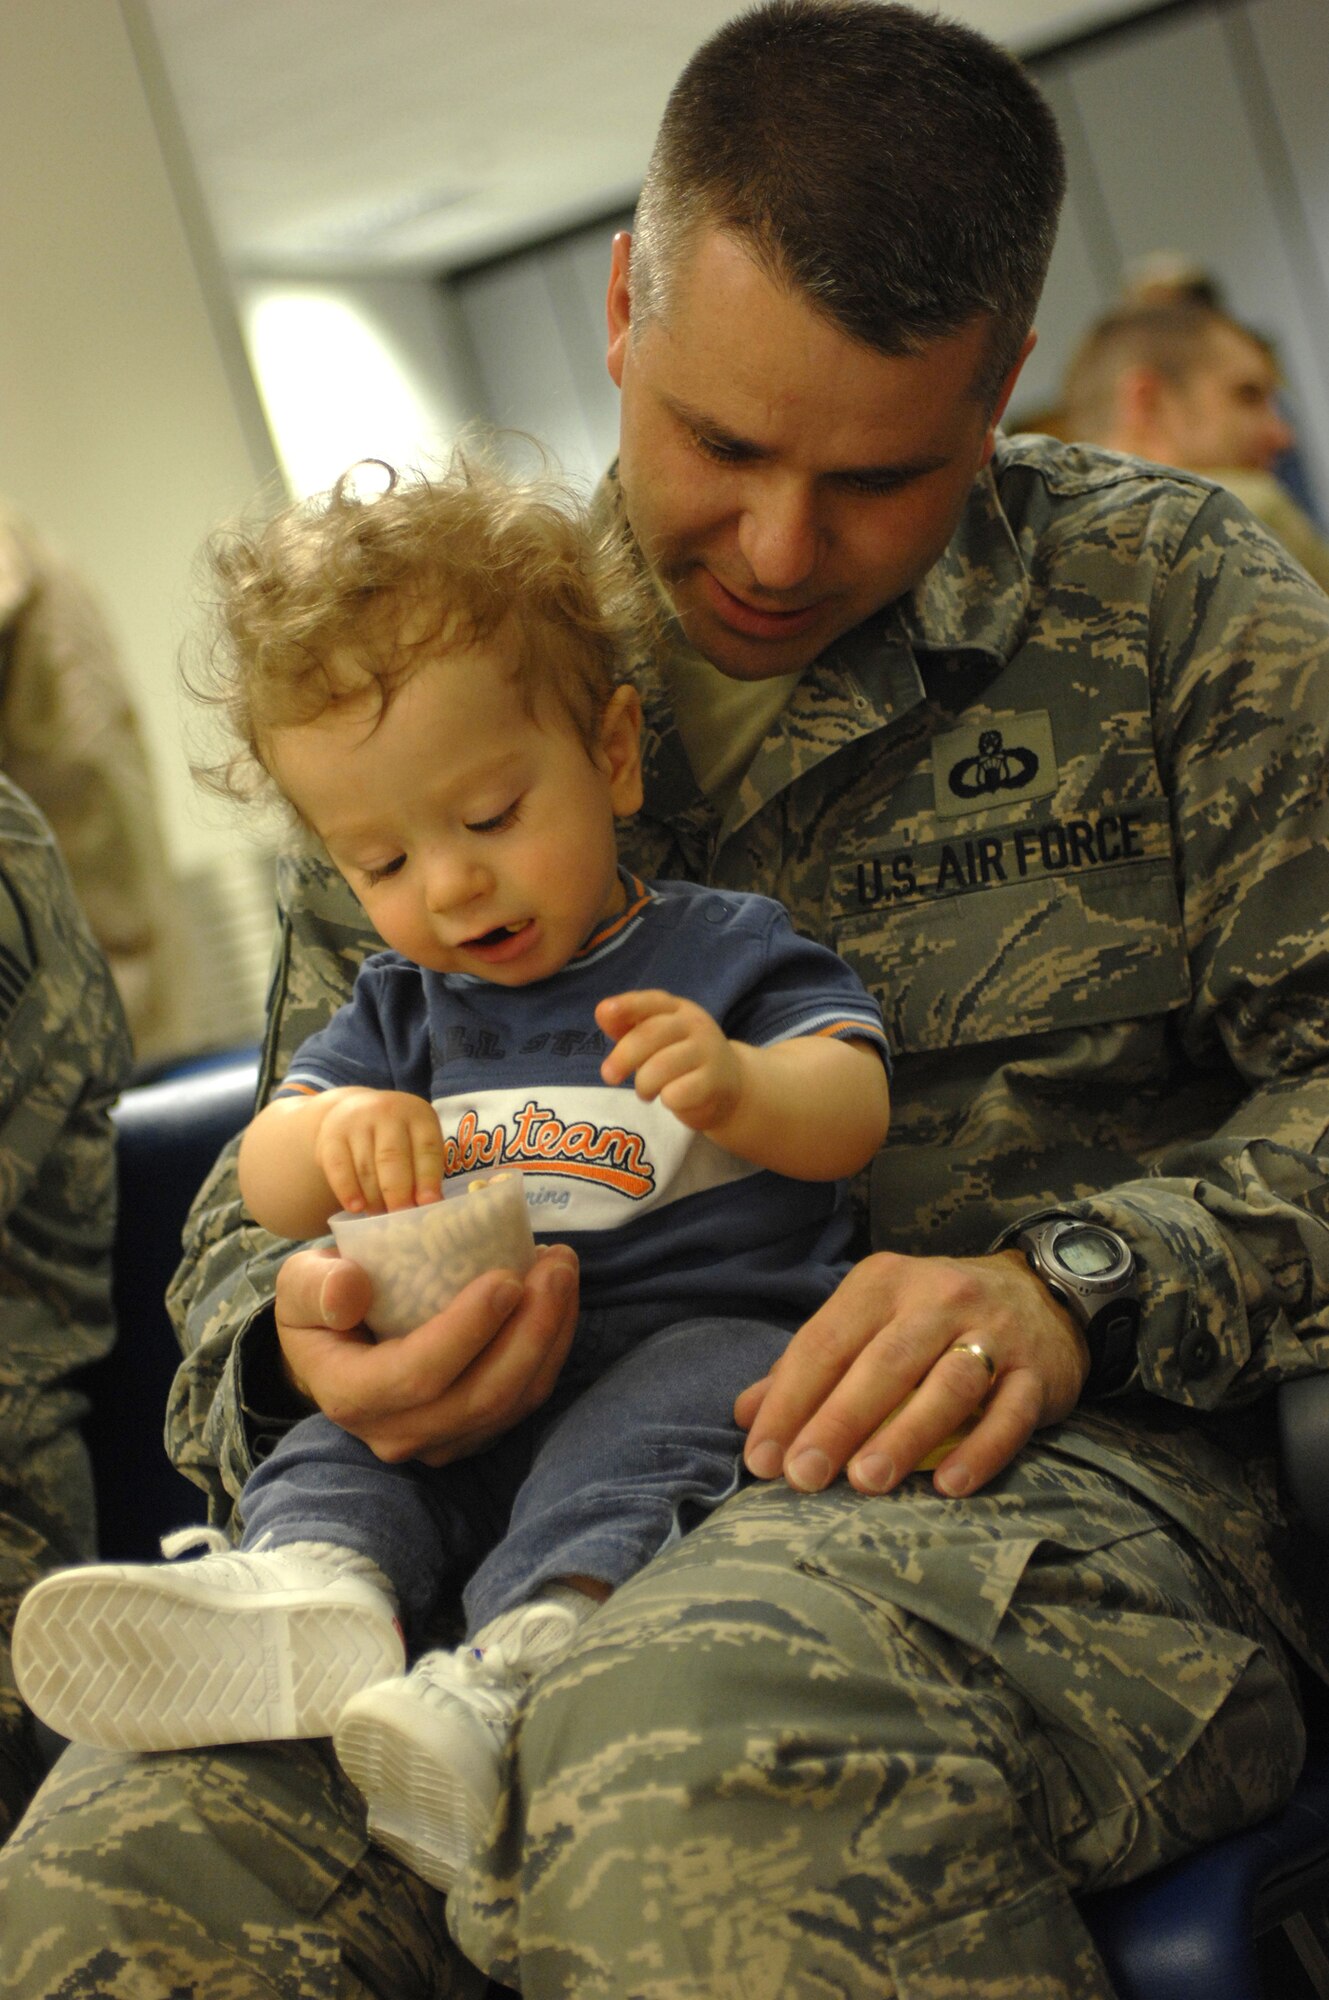 While waiting for his flight, Master Sgt. Michael Lang, a 100th Operations Support Squadron Airman, holds his 16-month-old son Nathaniel at the RAF Mildenhall passenger terminal, Sept. 14, 2007. This will be Sergeant Lang's third deployment but only his first as a father. The plane was an hour late arriving that morning giving Sergeant Lang time to help Nathaniel eat his cereal.  (U.S. Air Force photo by Tech. Sgt. Tracy L. DeMarco)
